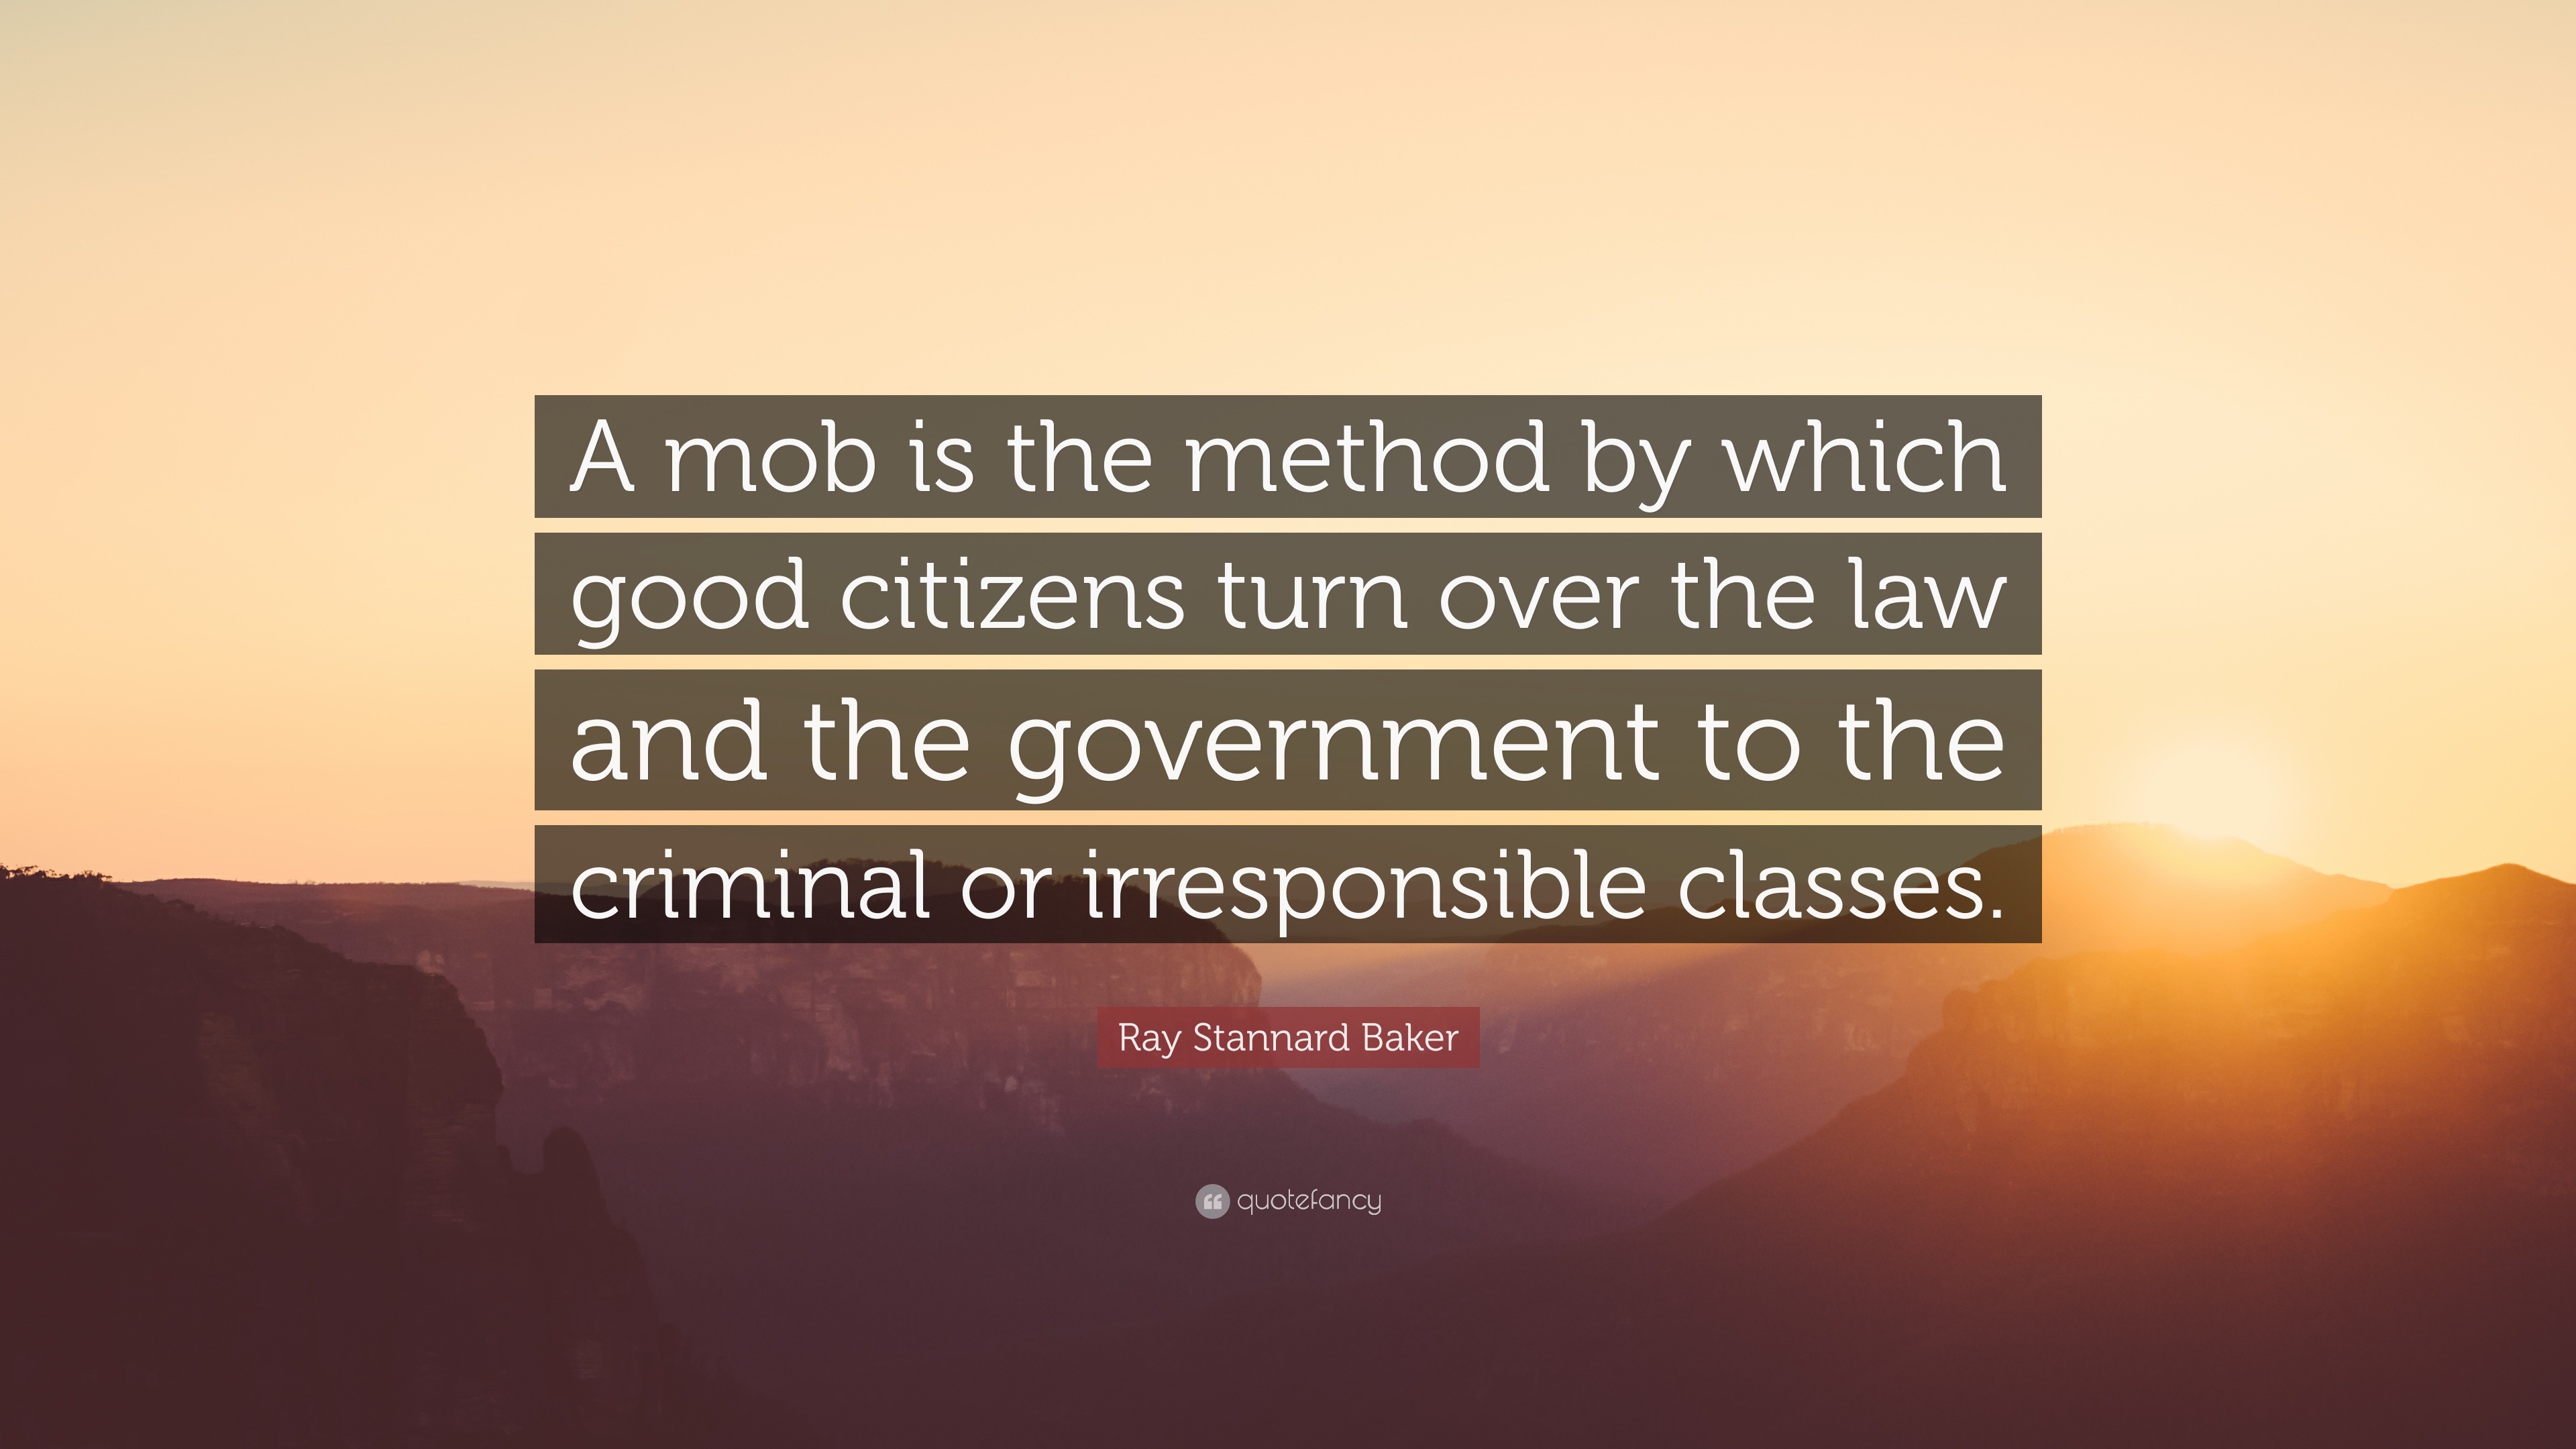 Ray Stannard Baker Quote: “A mob is the method by which good